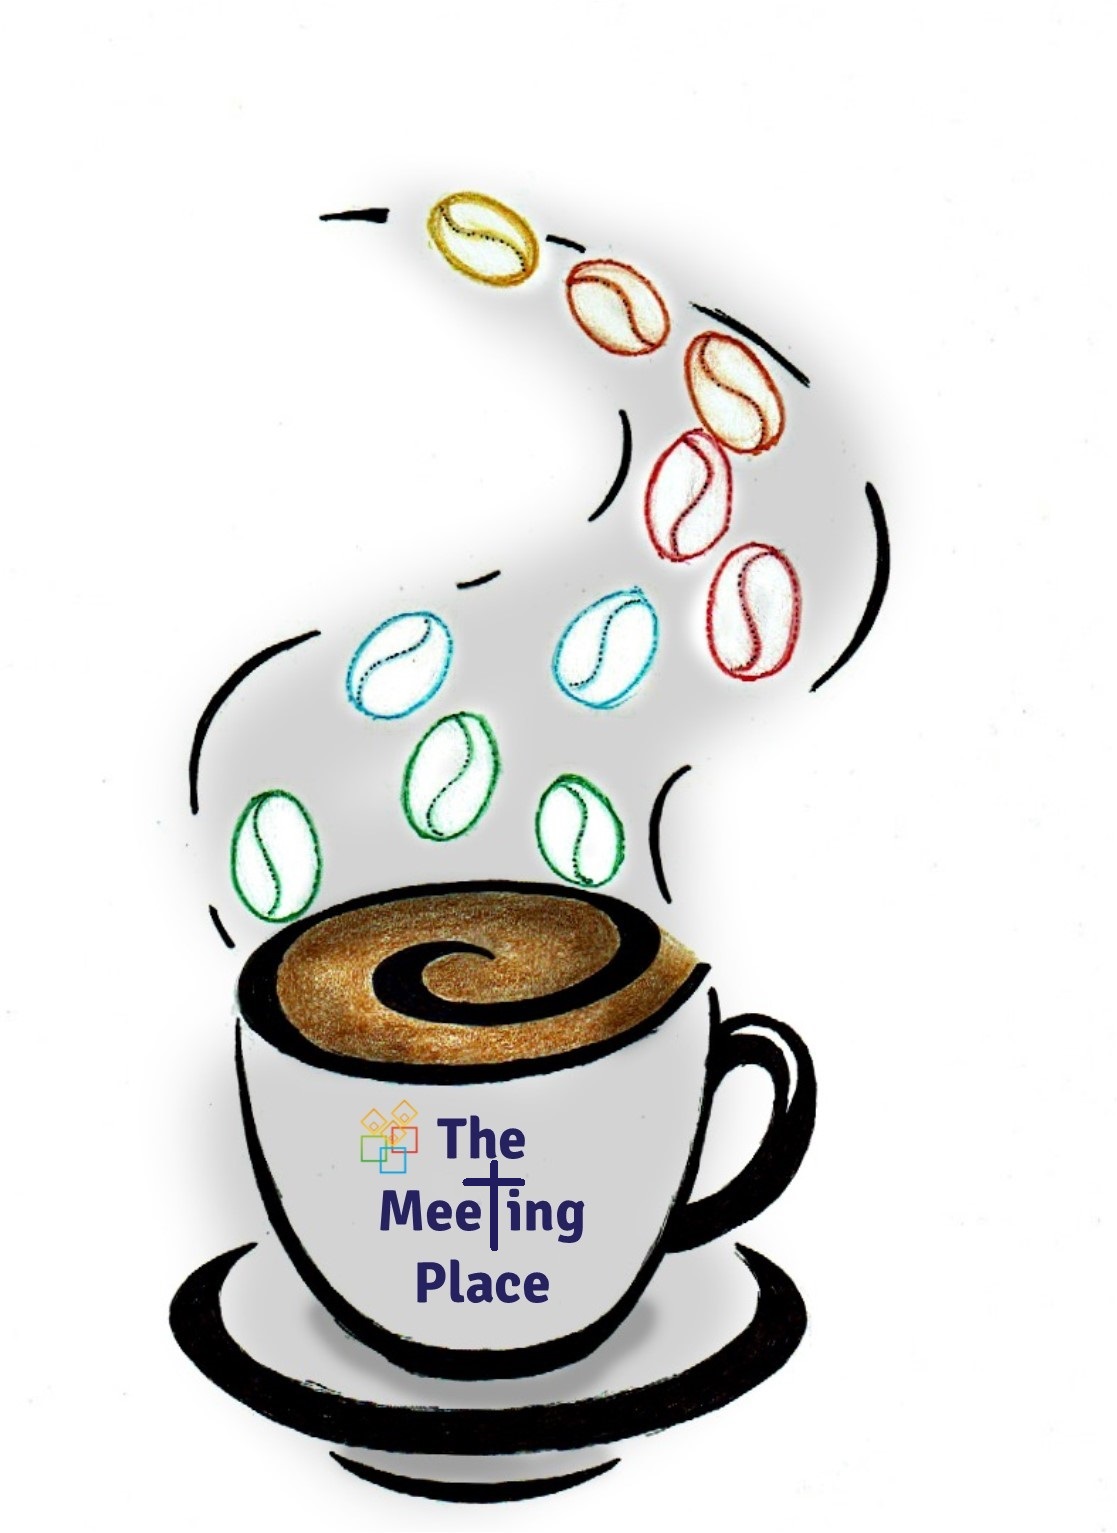 The meeting place logo10 (2)